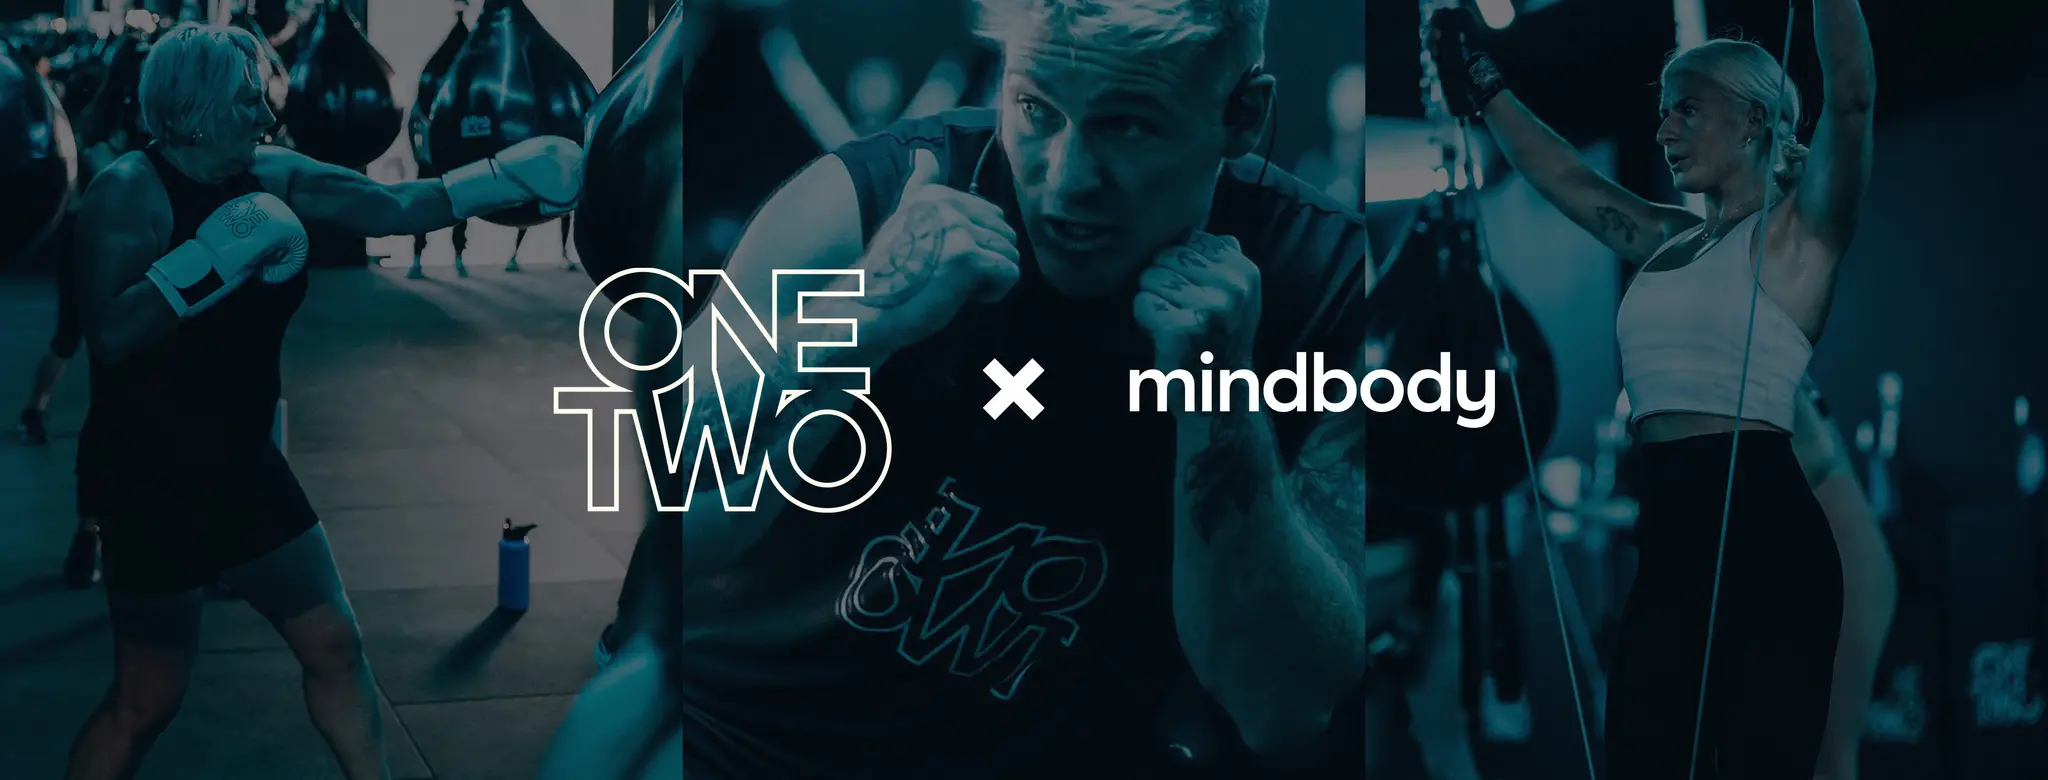 One Two Boxing and Mindbody 